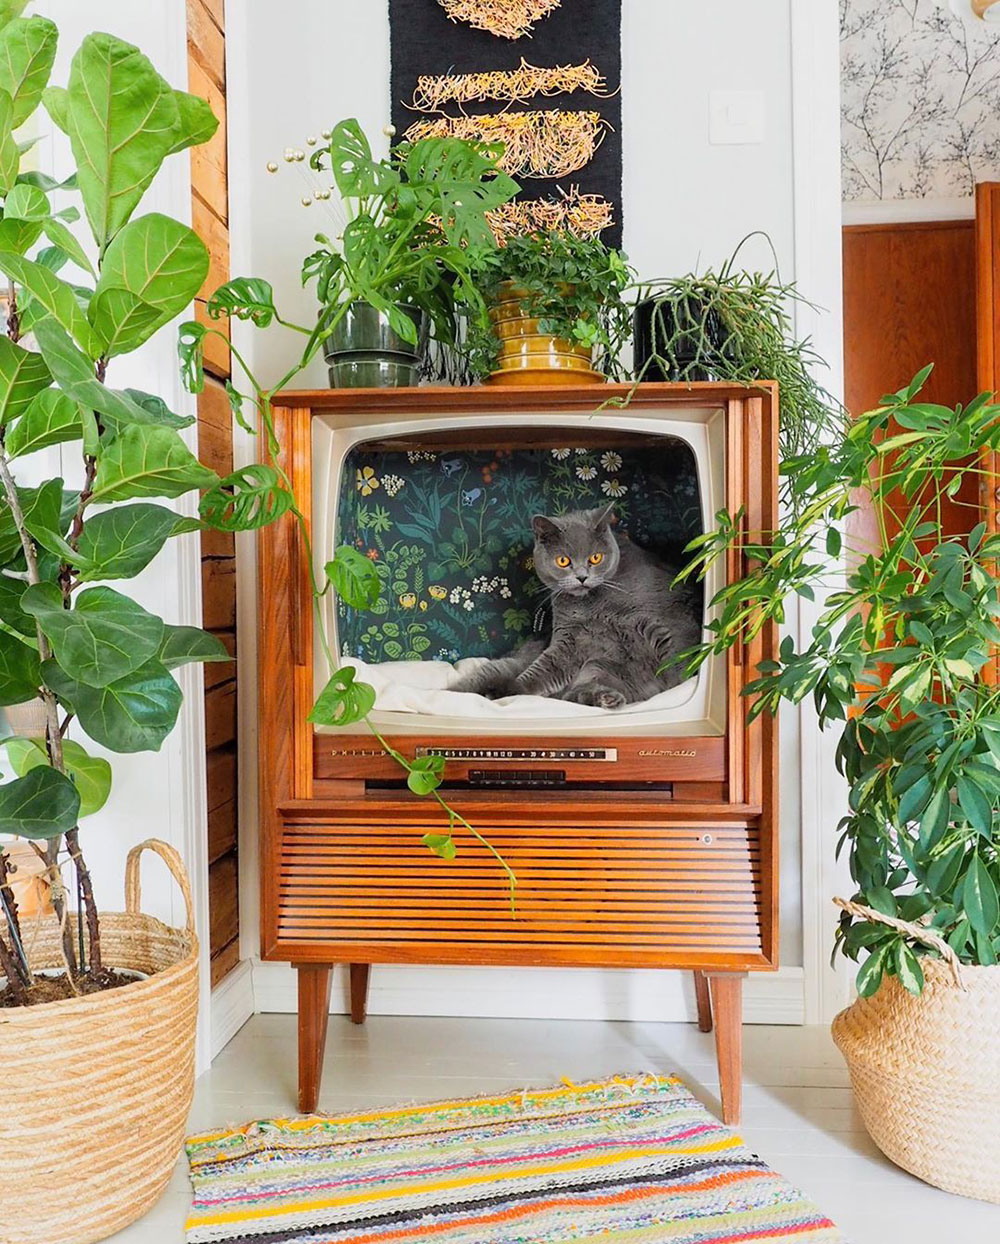 DIY Cat Bed Upcycled Out oF Vintage Television